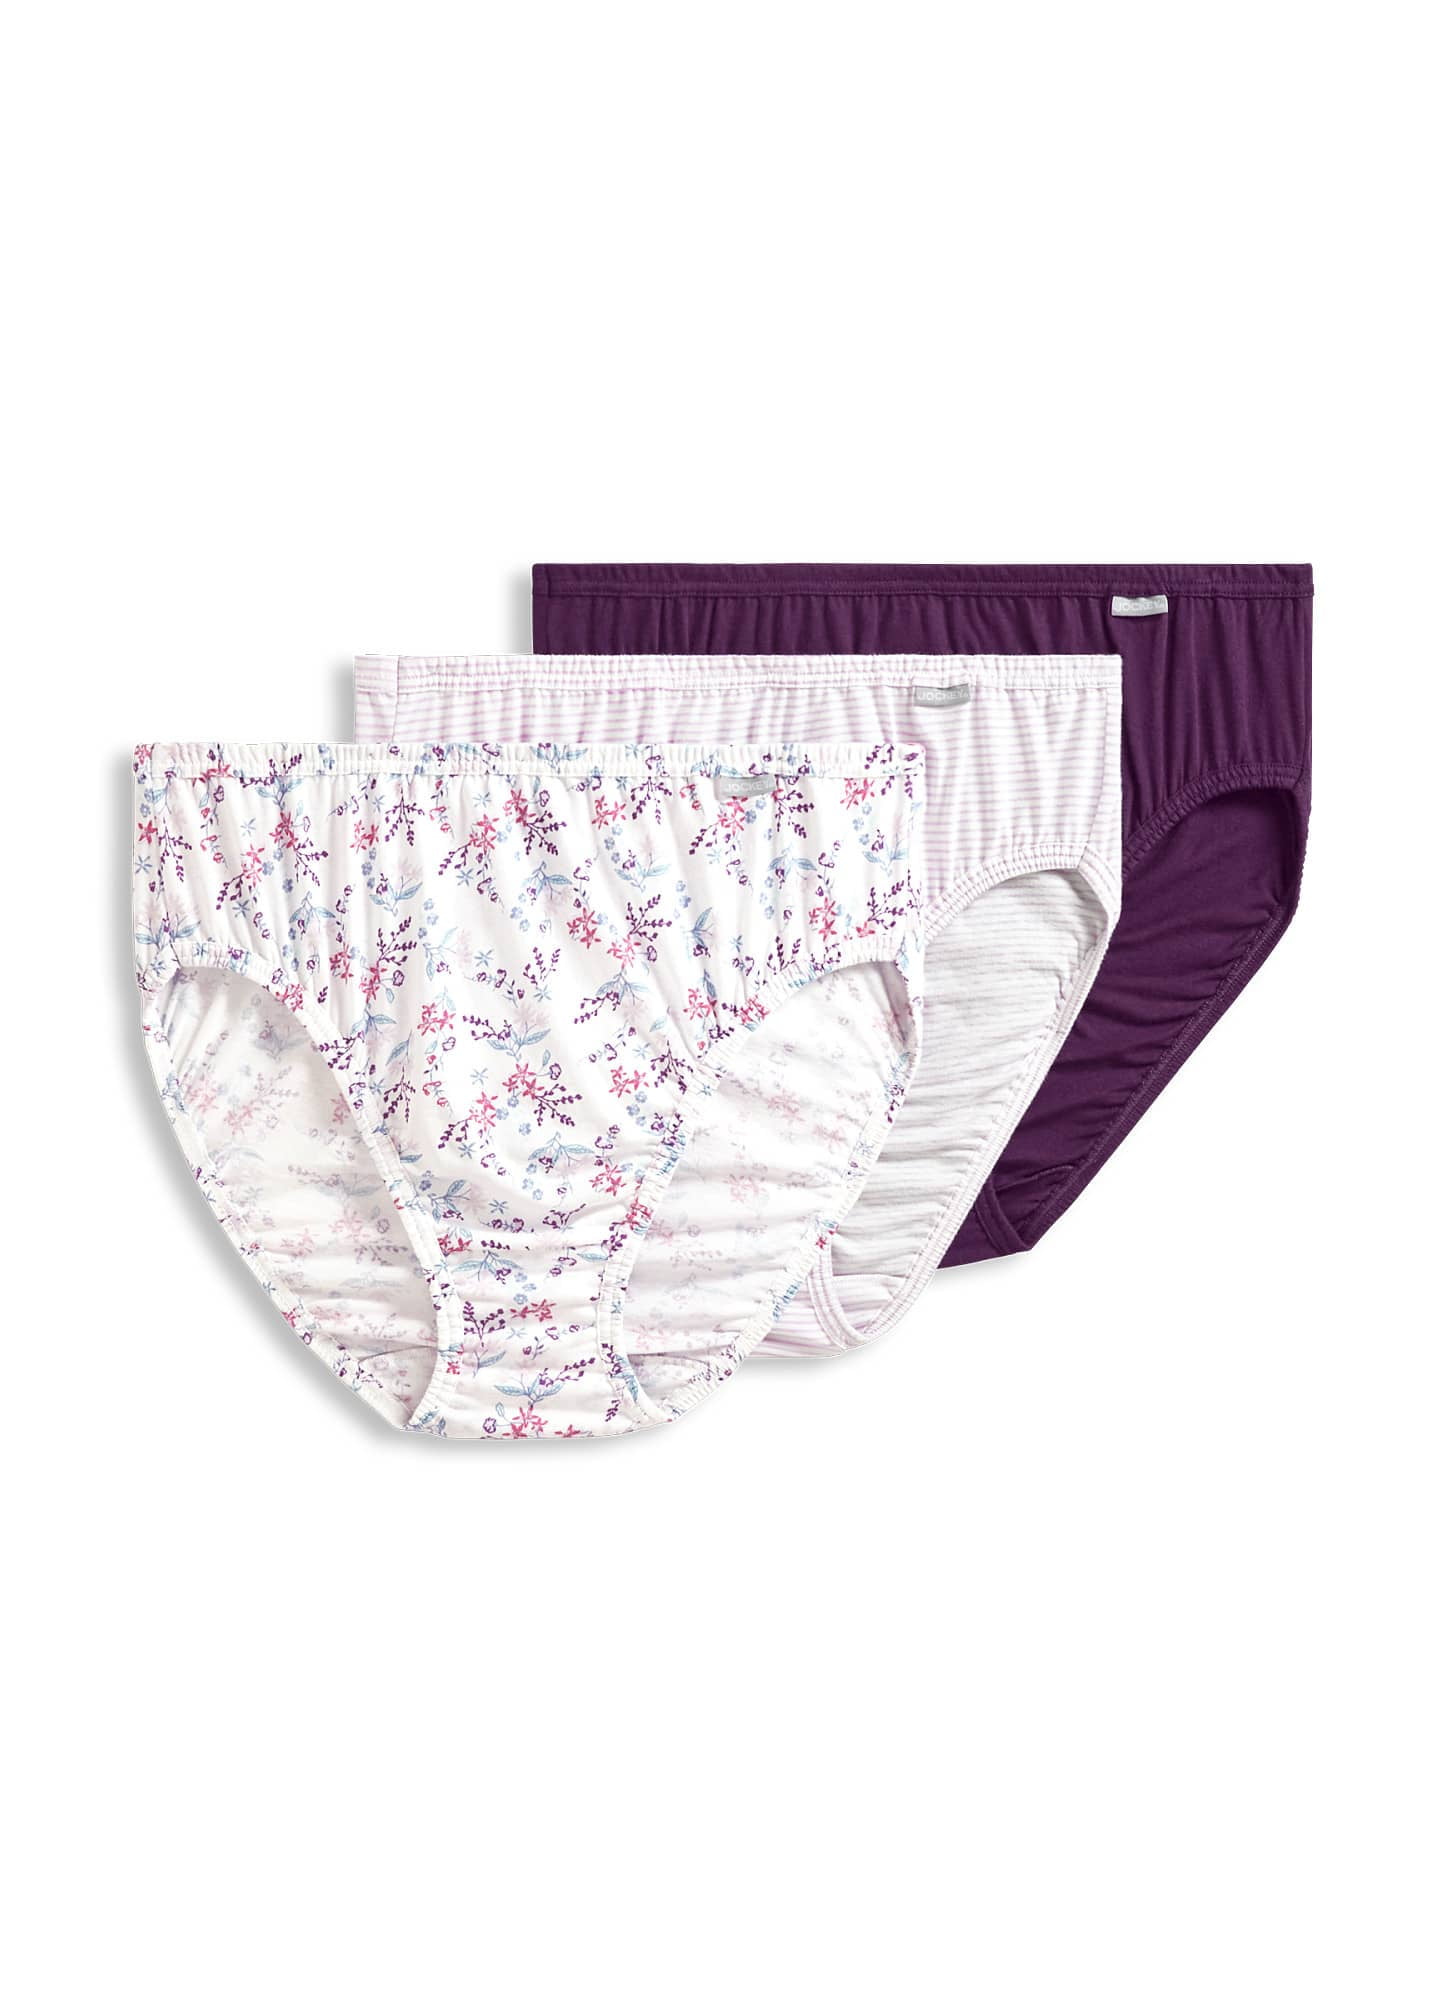 Police Auctions Canada - Women's Jockey Elance French Cut Panties, 3 Pack - Size  8/XL (517533L)